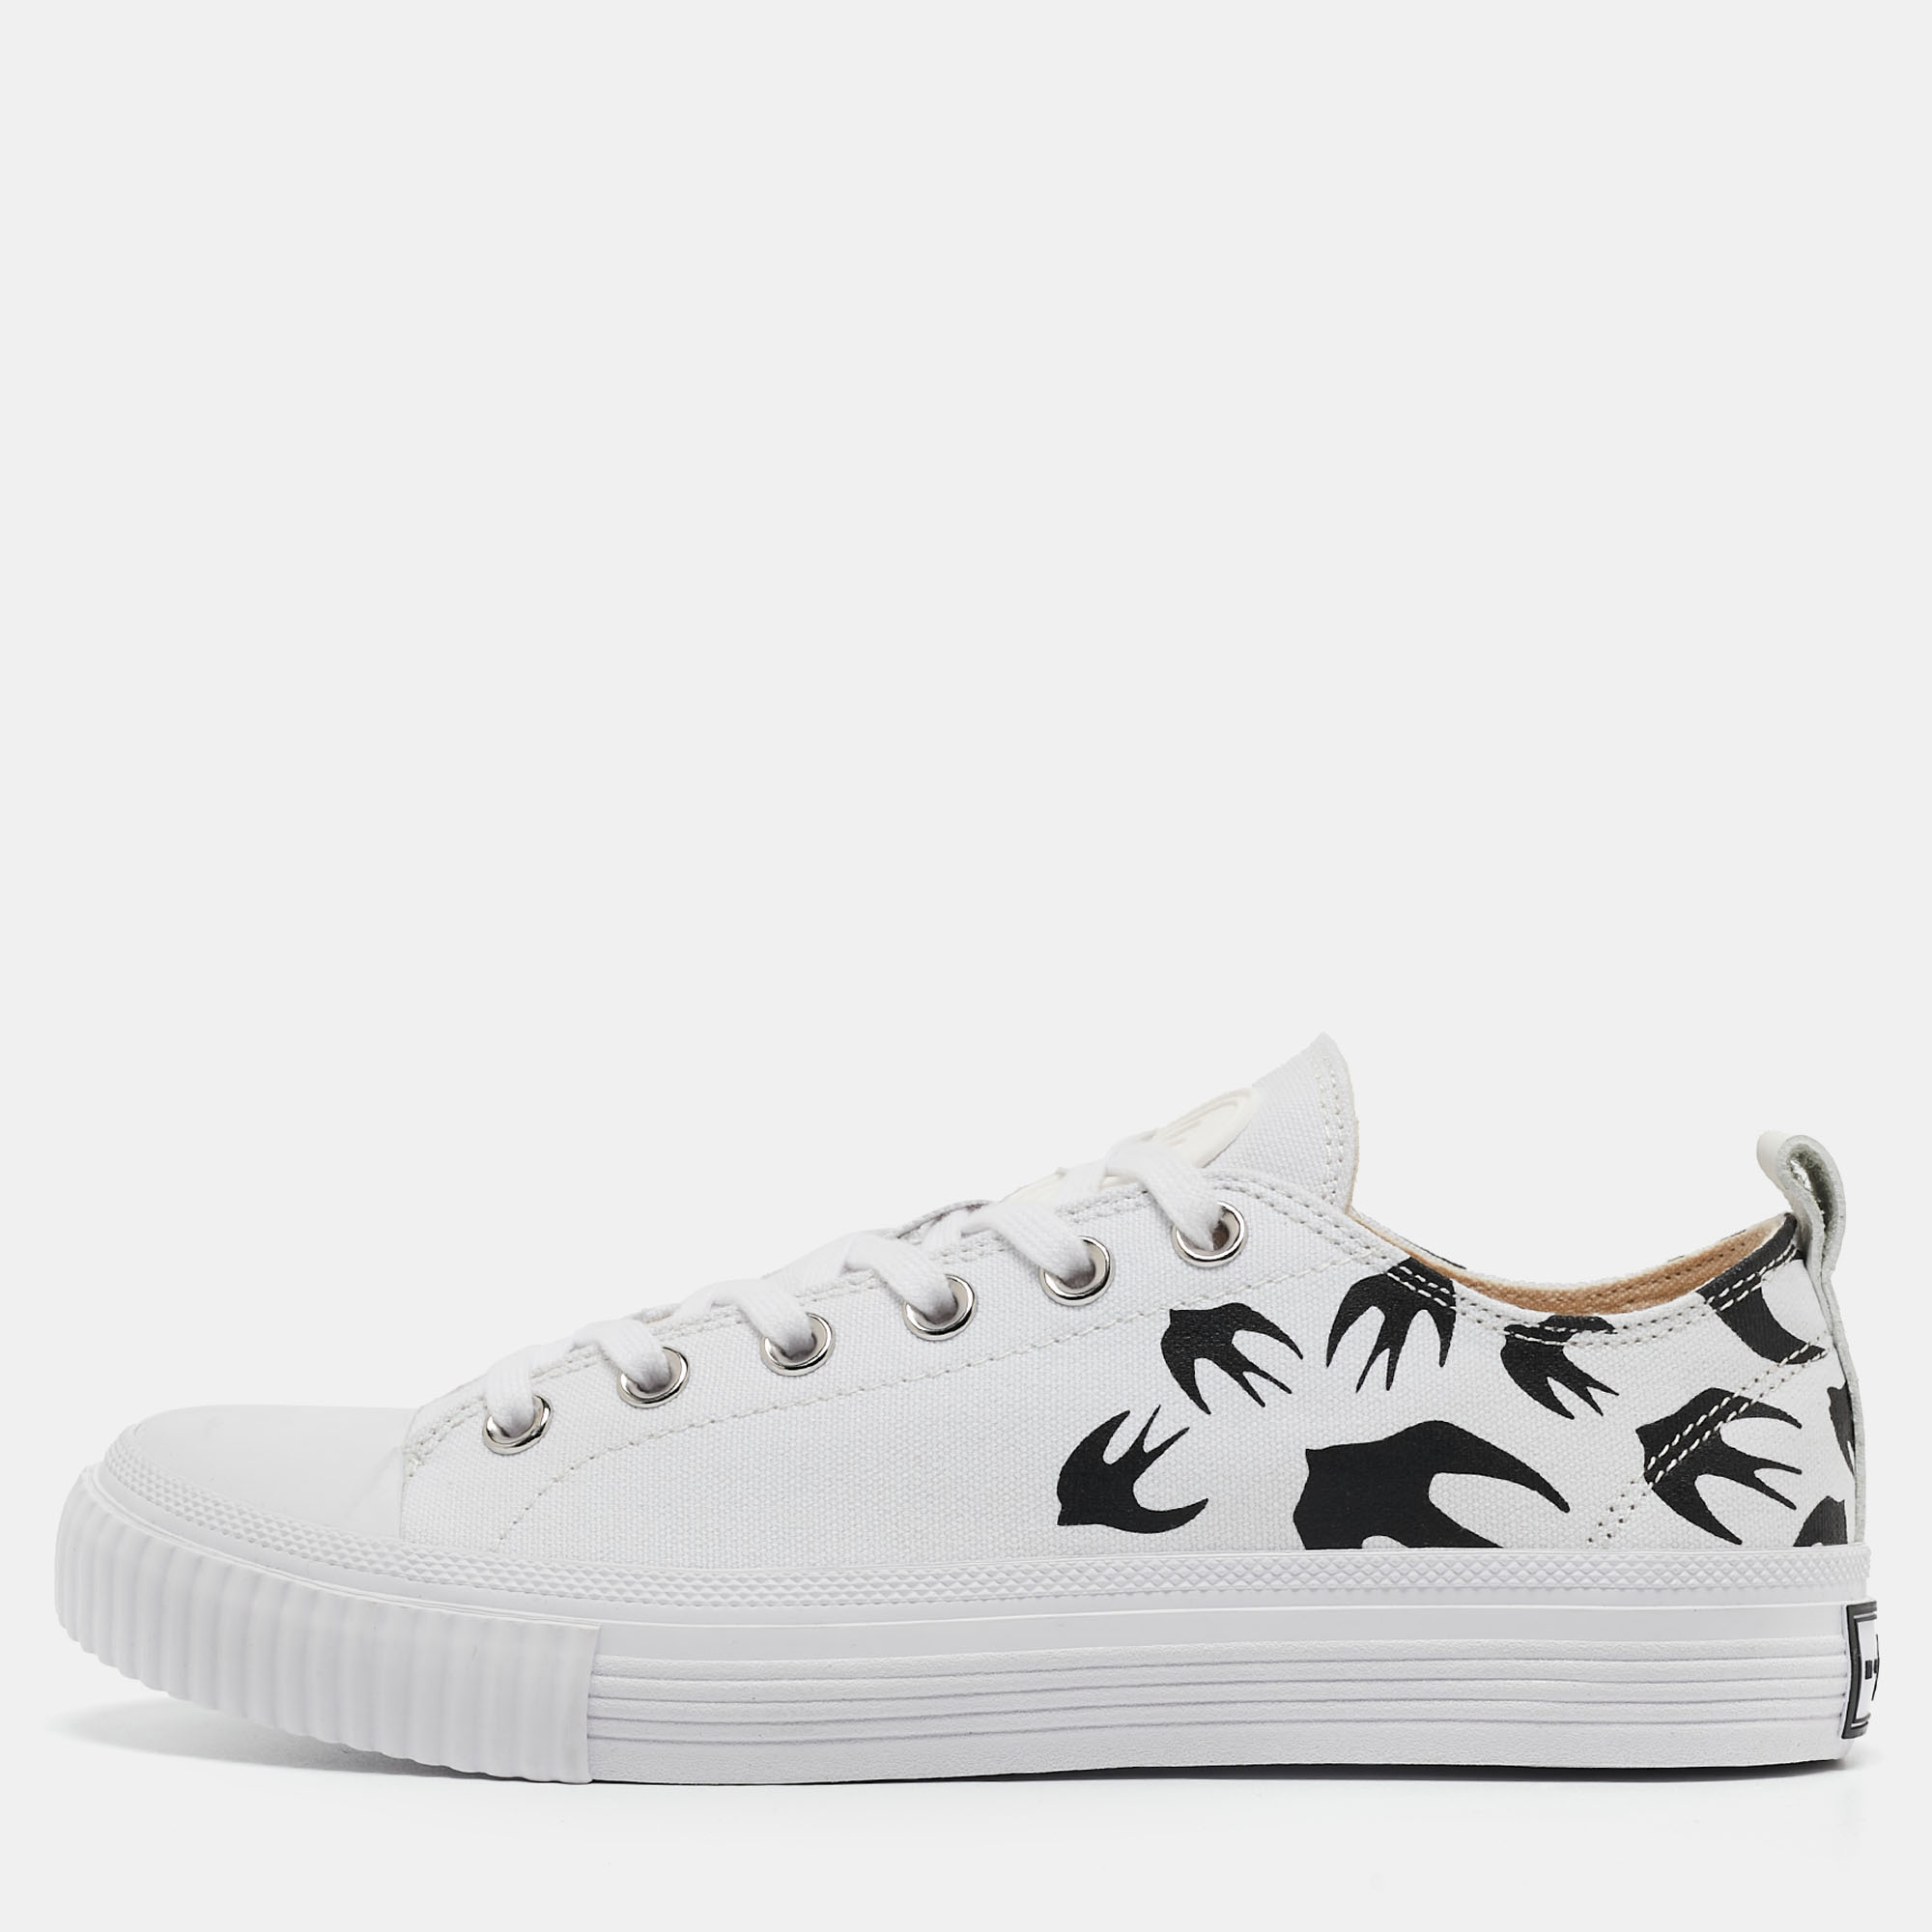 Mcq by alexander mcqueen white/black canvas shallow swarm sneakers size 40